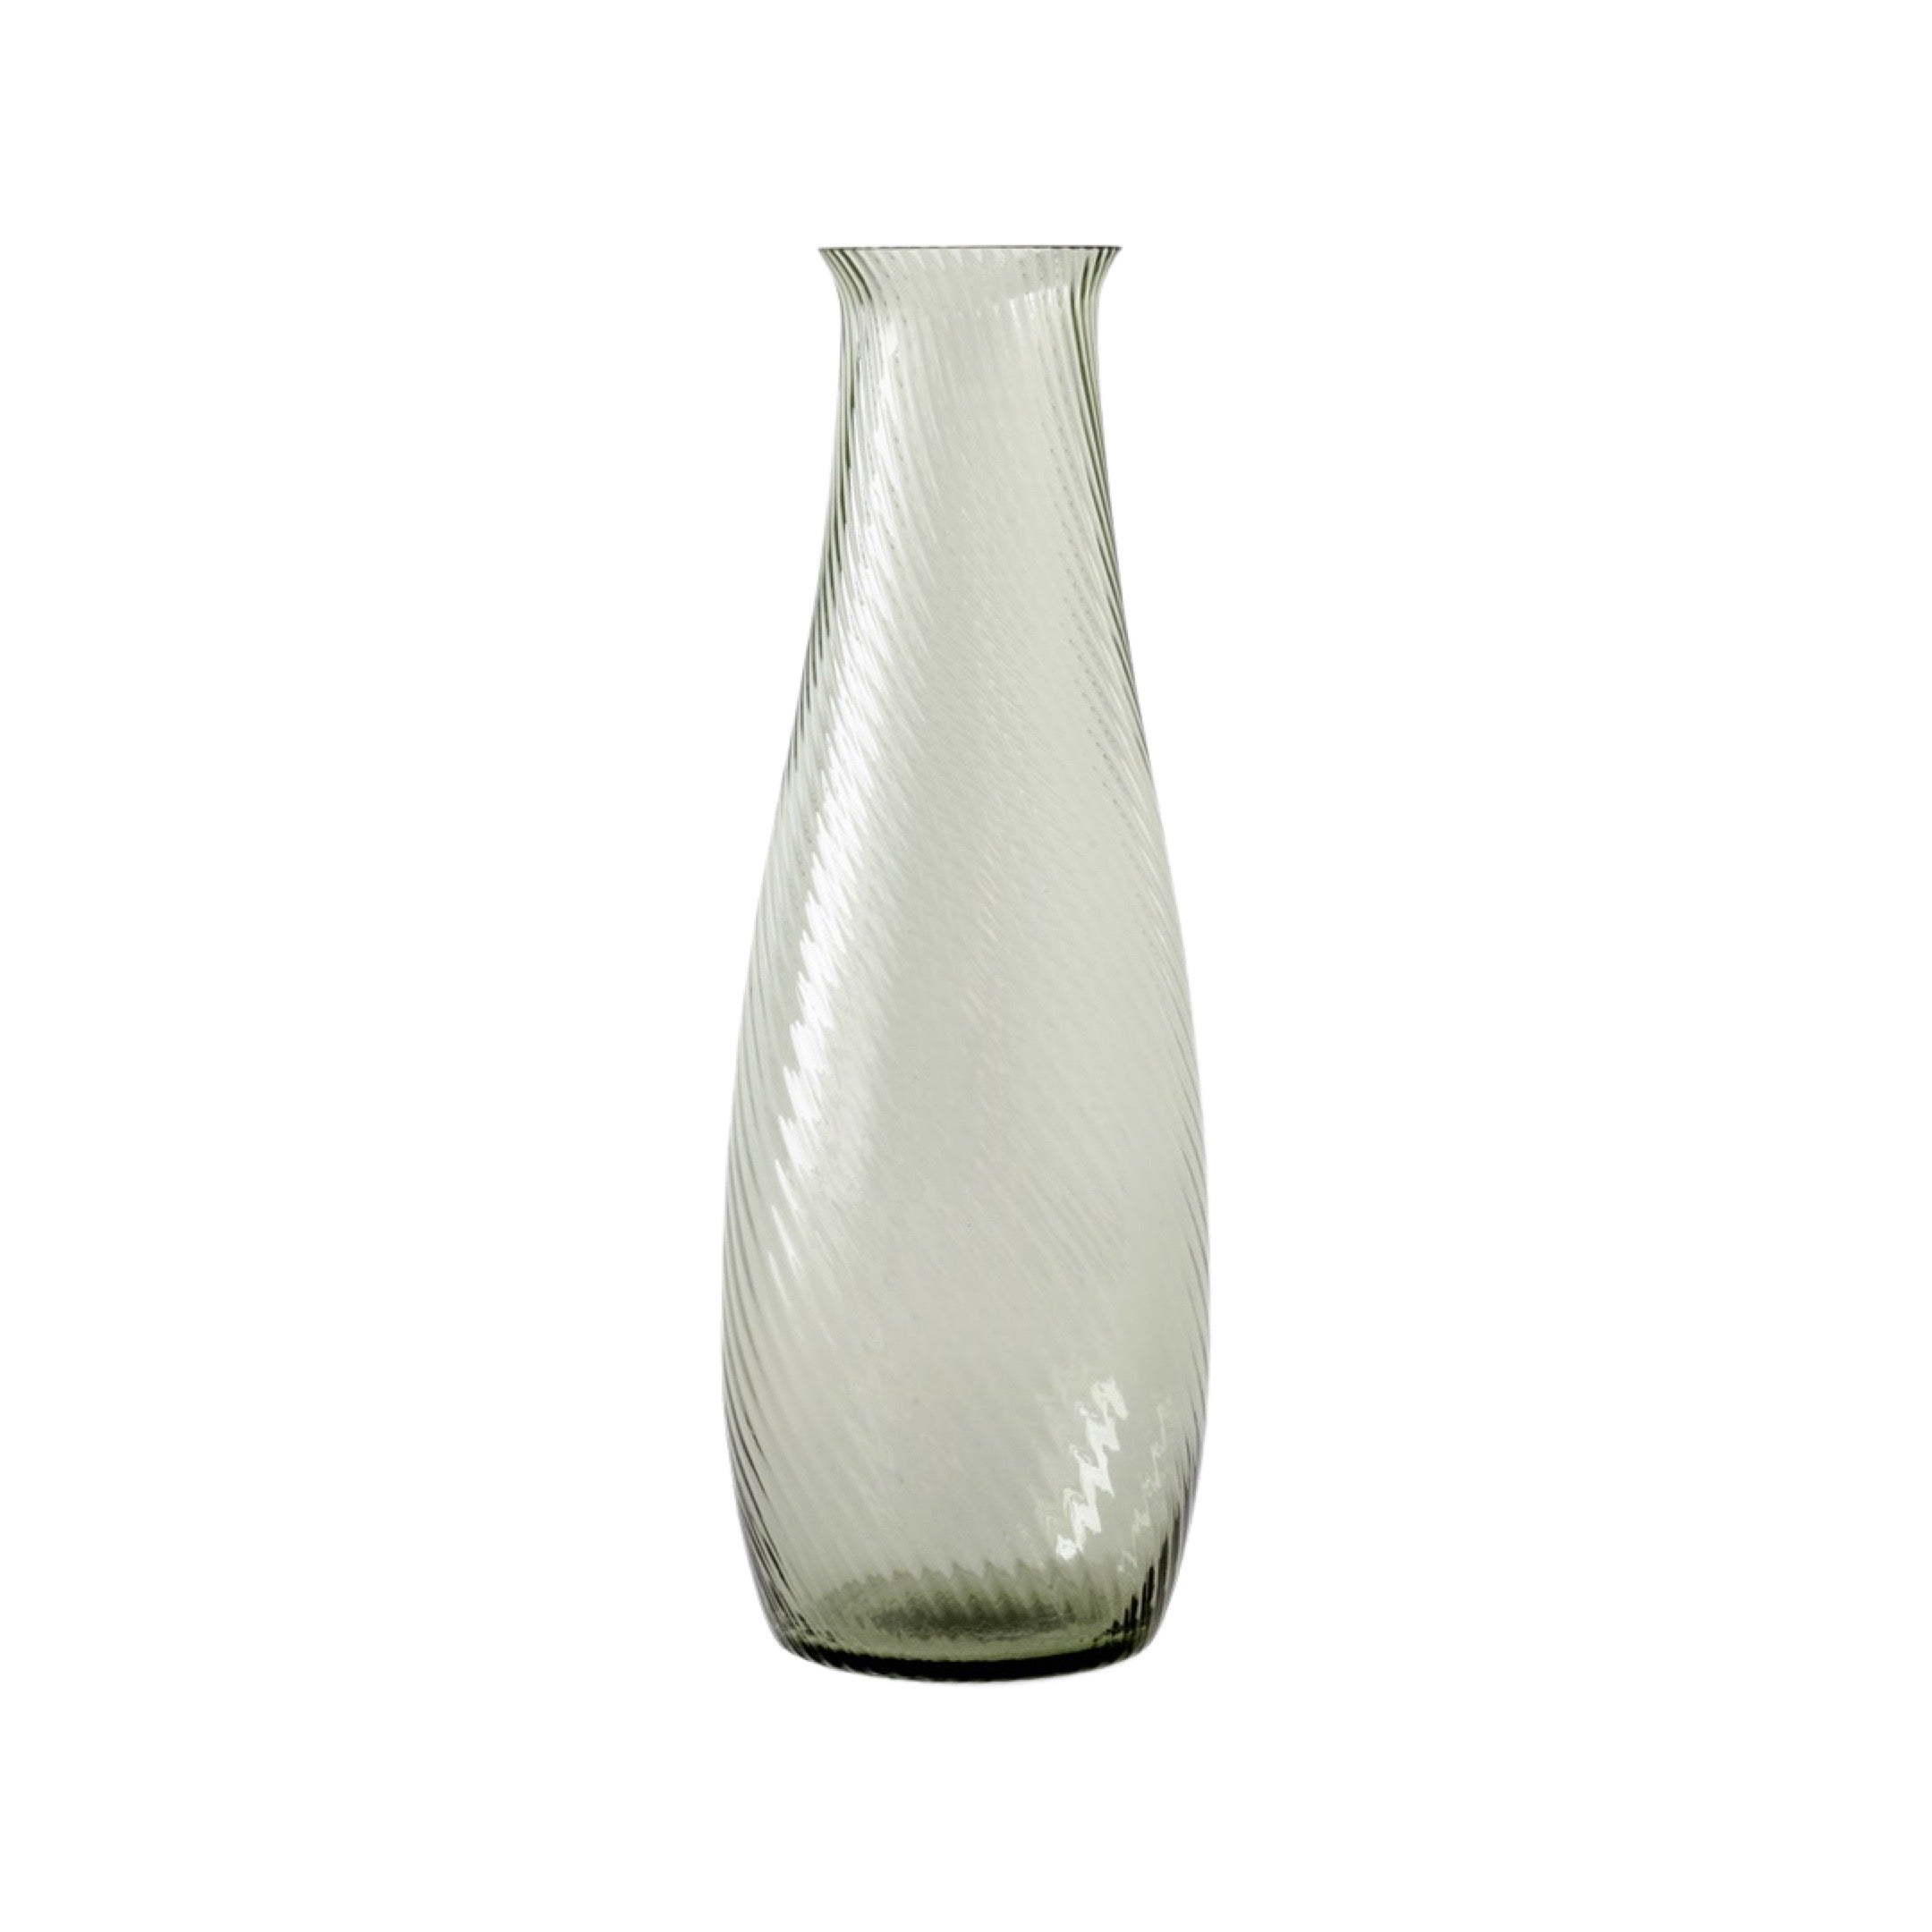 &Tradition SC63 Collect Carafe - 1.2L